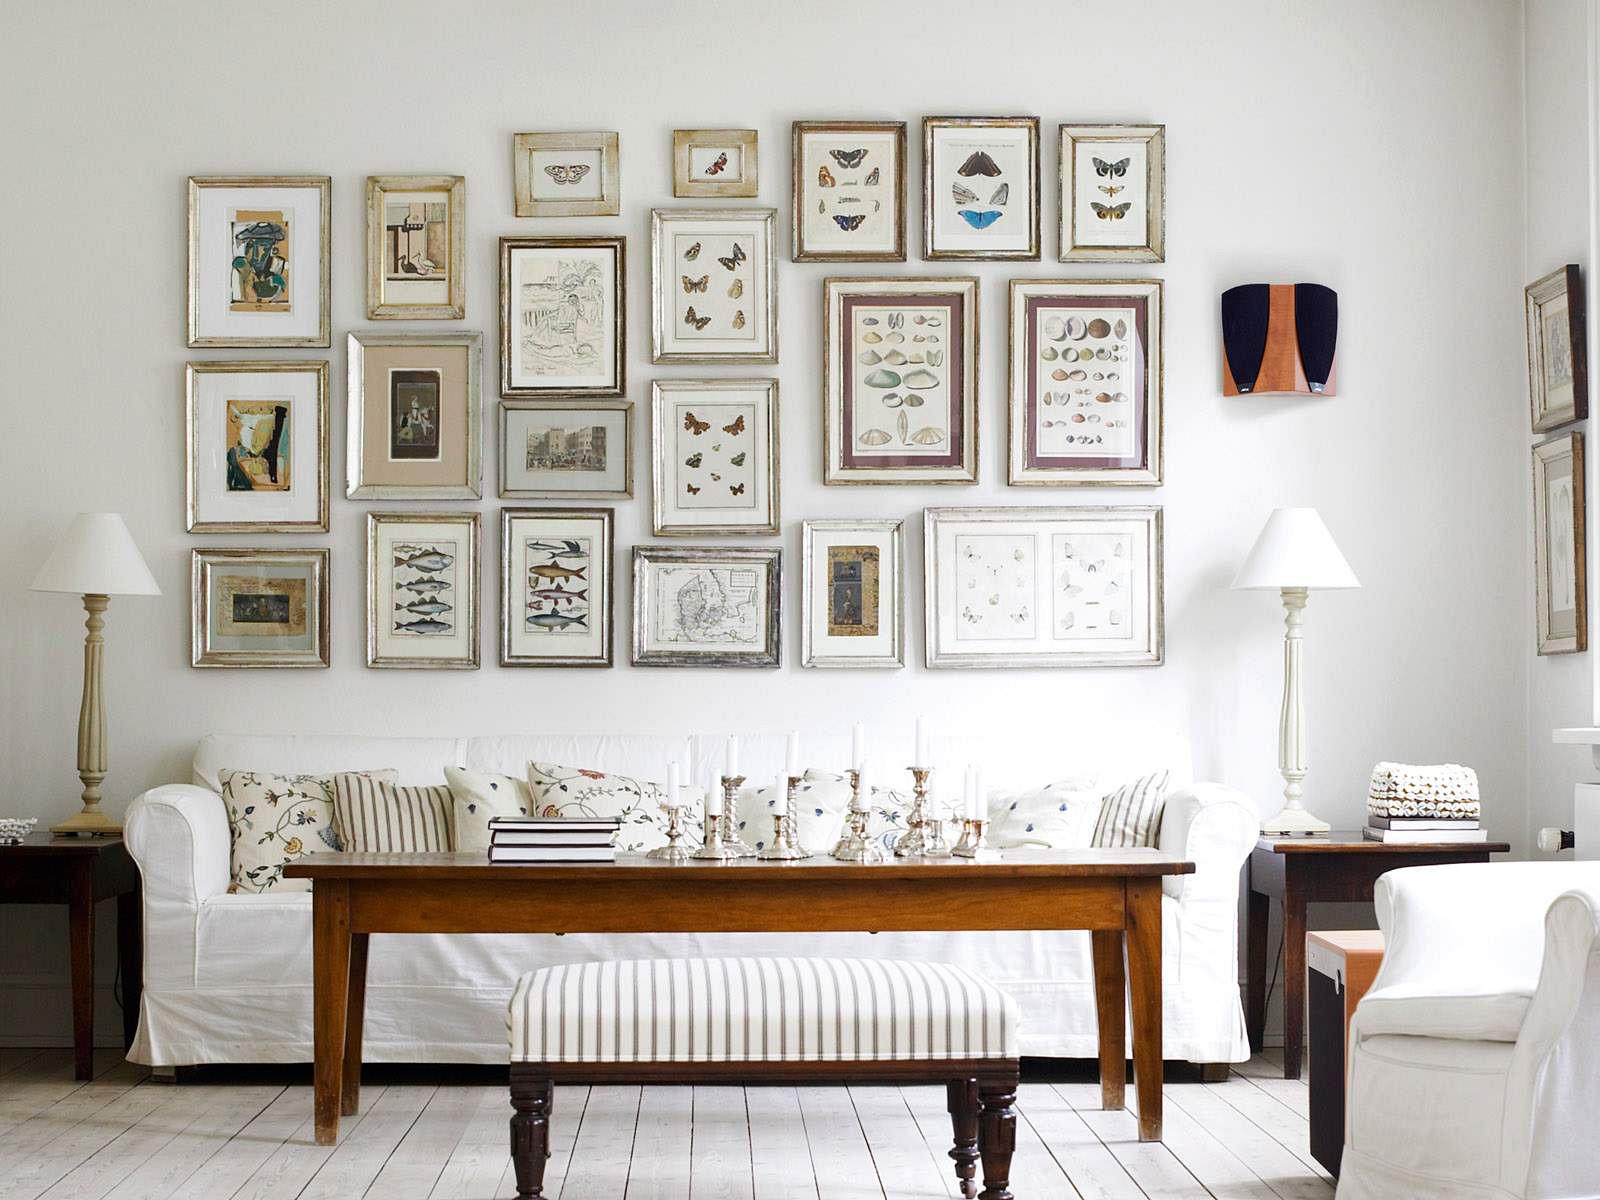 gallery wall layout 5 frames